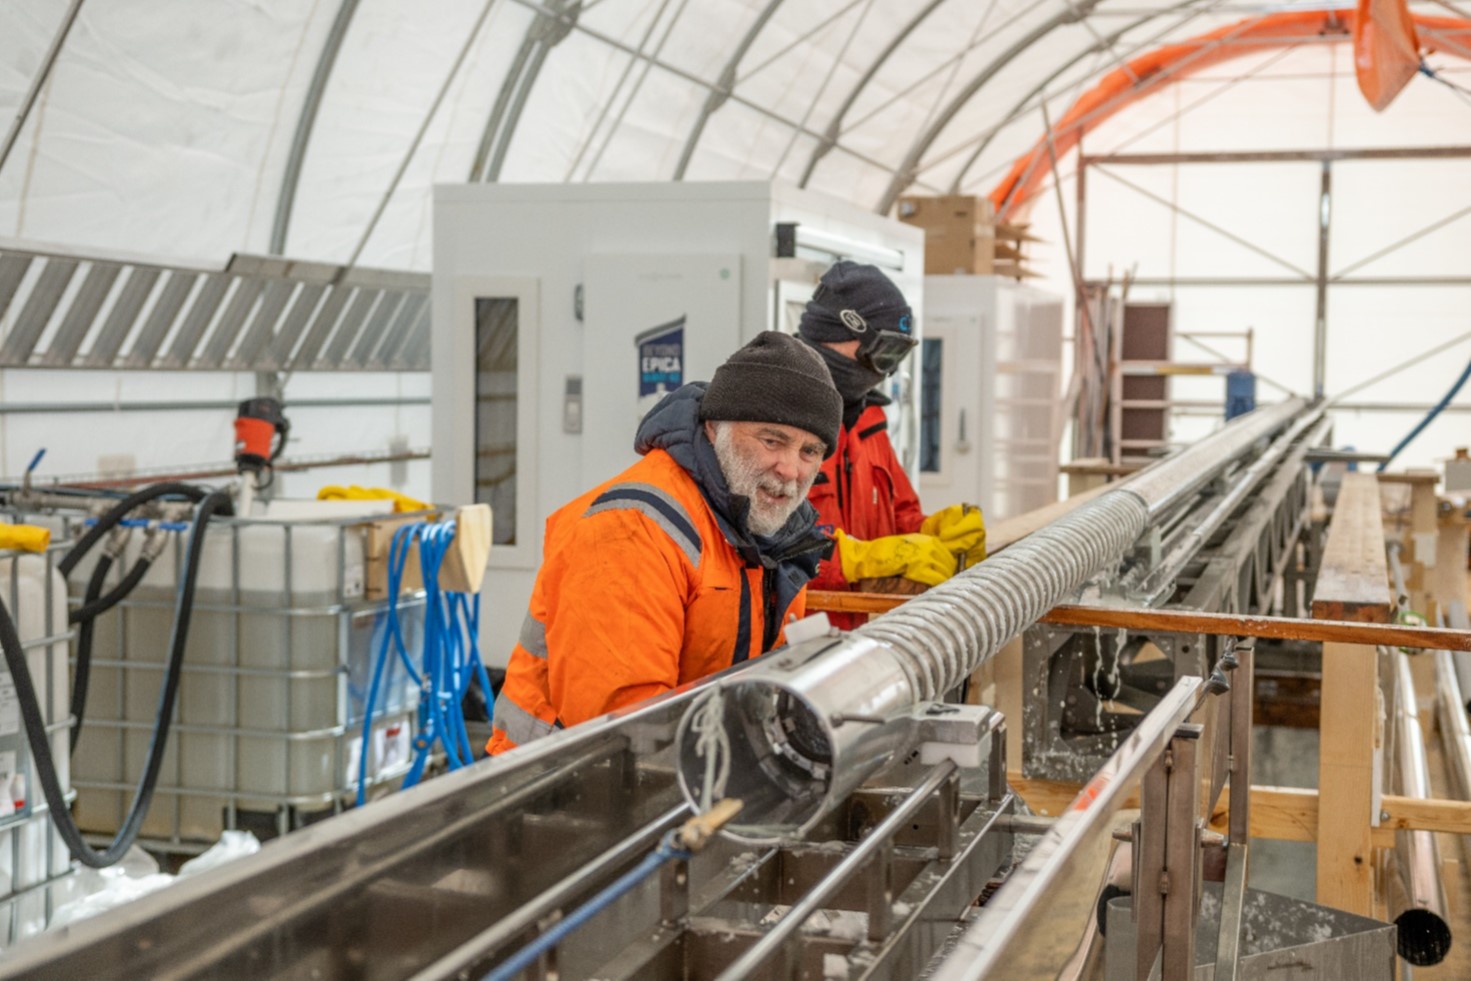 Martin and Robert extracting the core barrel from the main barrel of the drill. In the background, to the left, is one of the two 1000 liter containers for handling the drill fluid – we’ll look more at how the fluid is handled and recovered from the drill in the next couple of days.